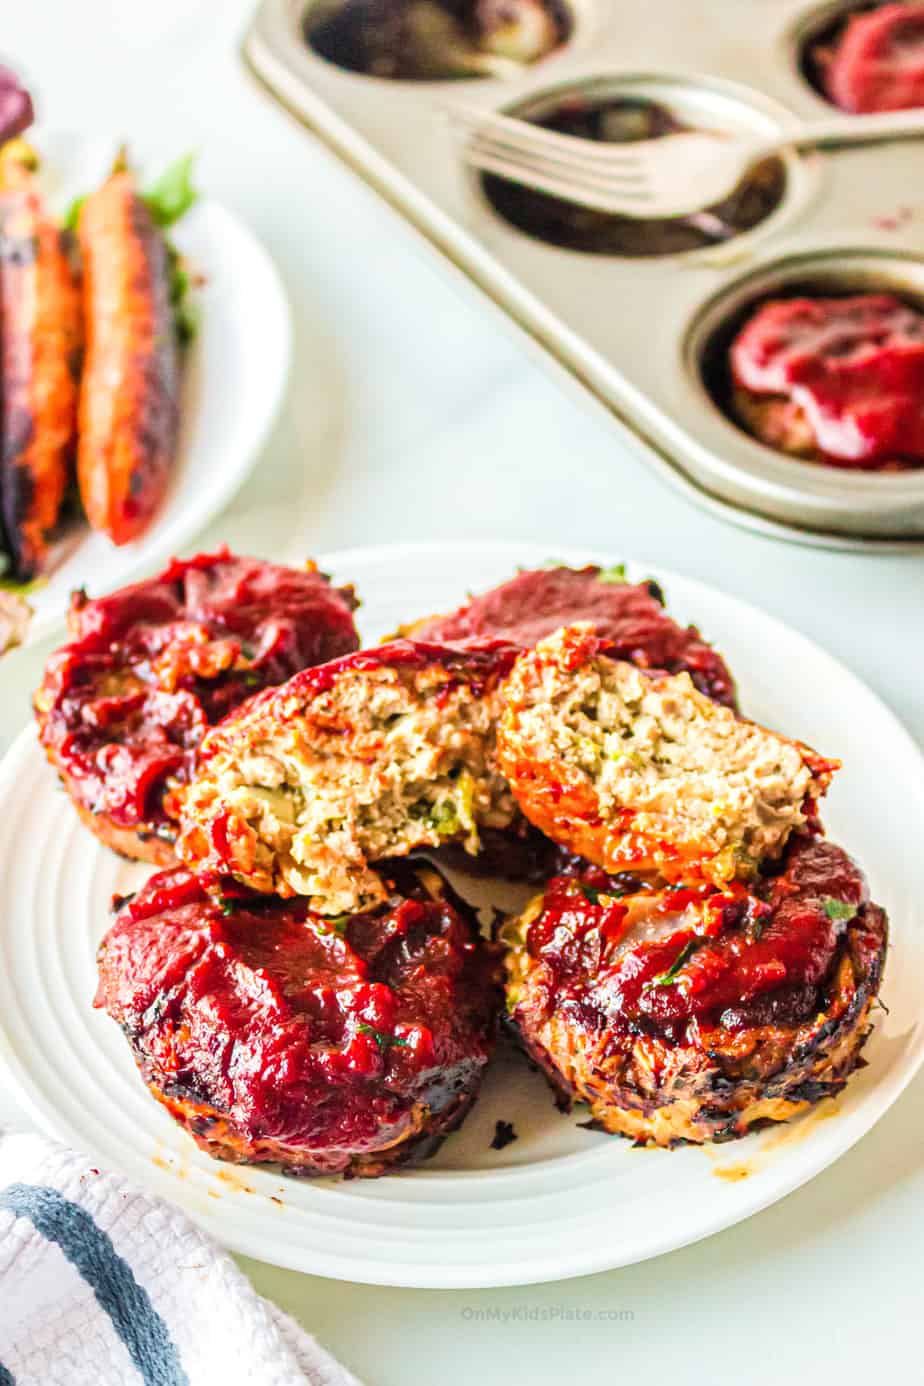 Stack of mini turkey meatloaf muffins on a plate with the muffin on top broken open. A muffin pan and roasted carrots are in the background.